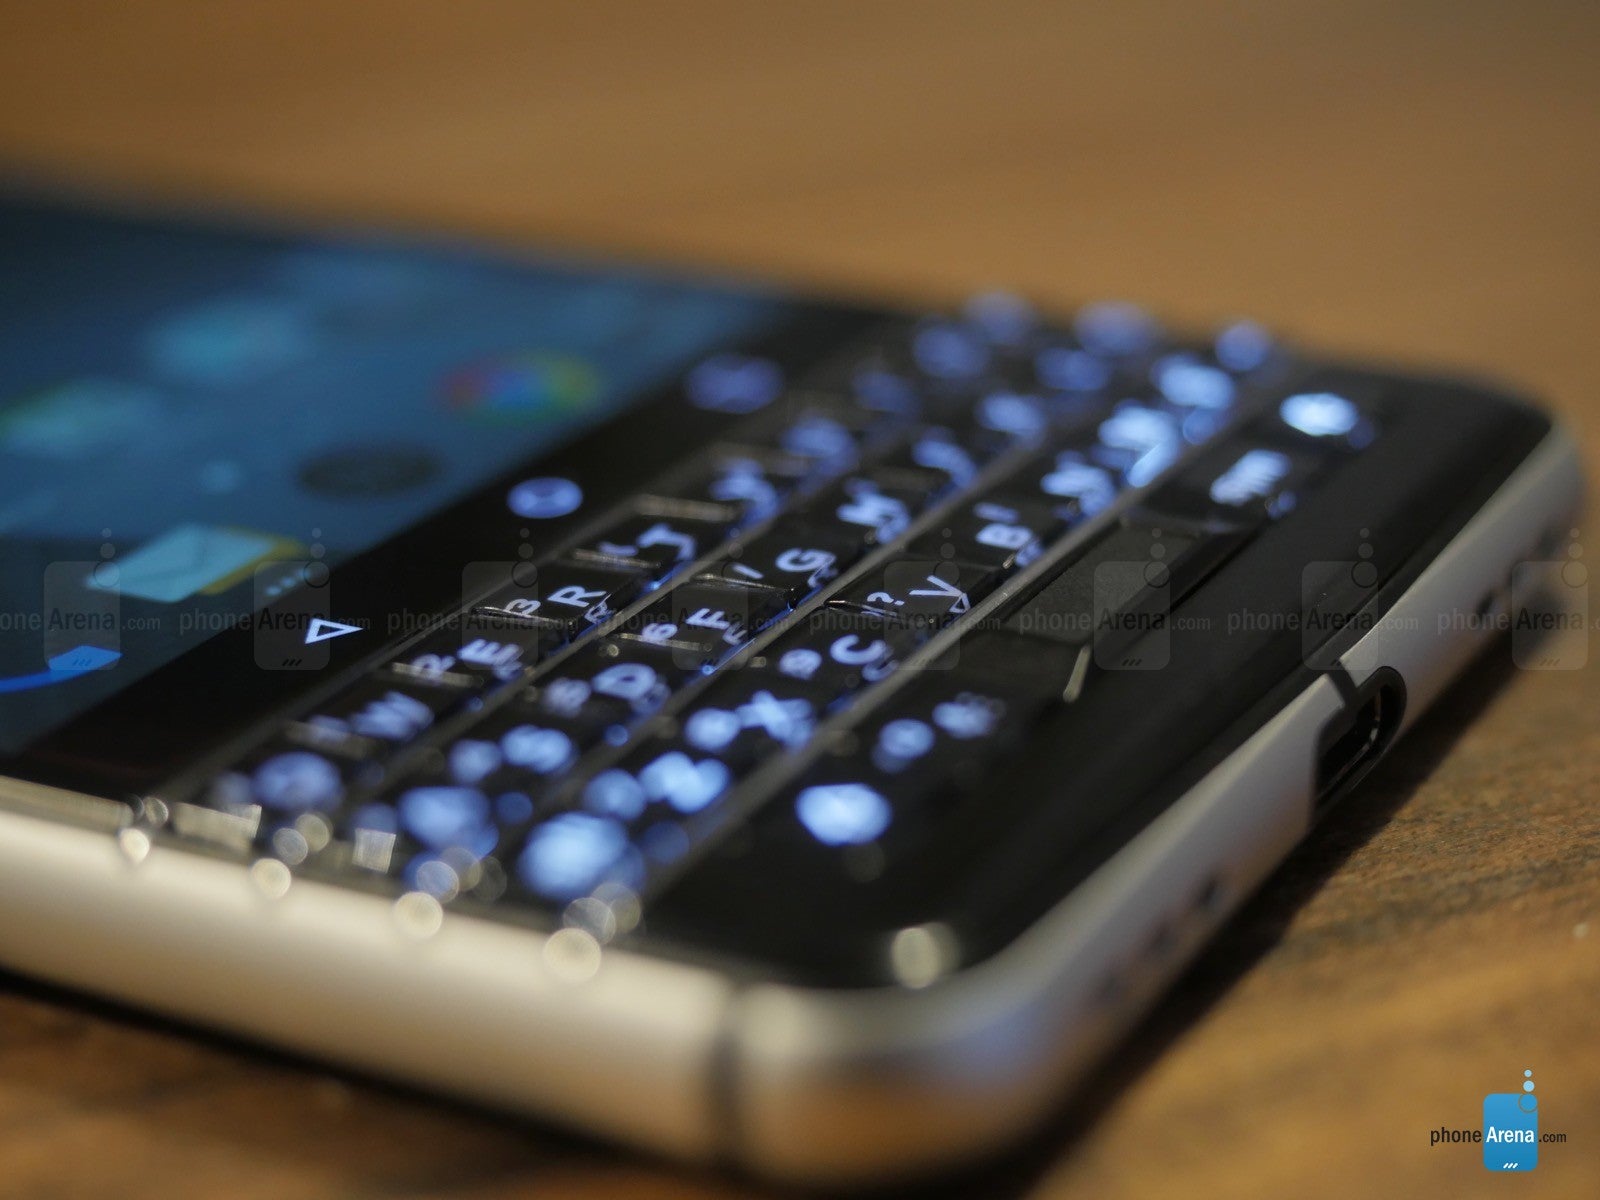 BlackBerry KEYone preview: let's bring the physical keyboard back from the dead!